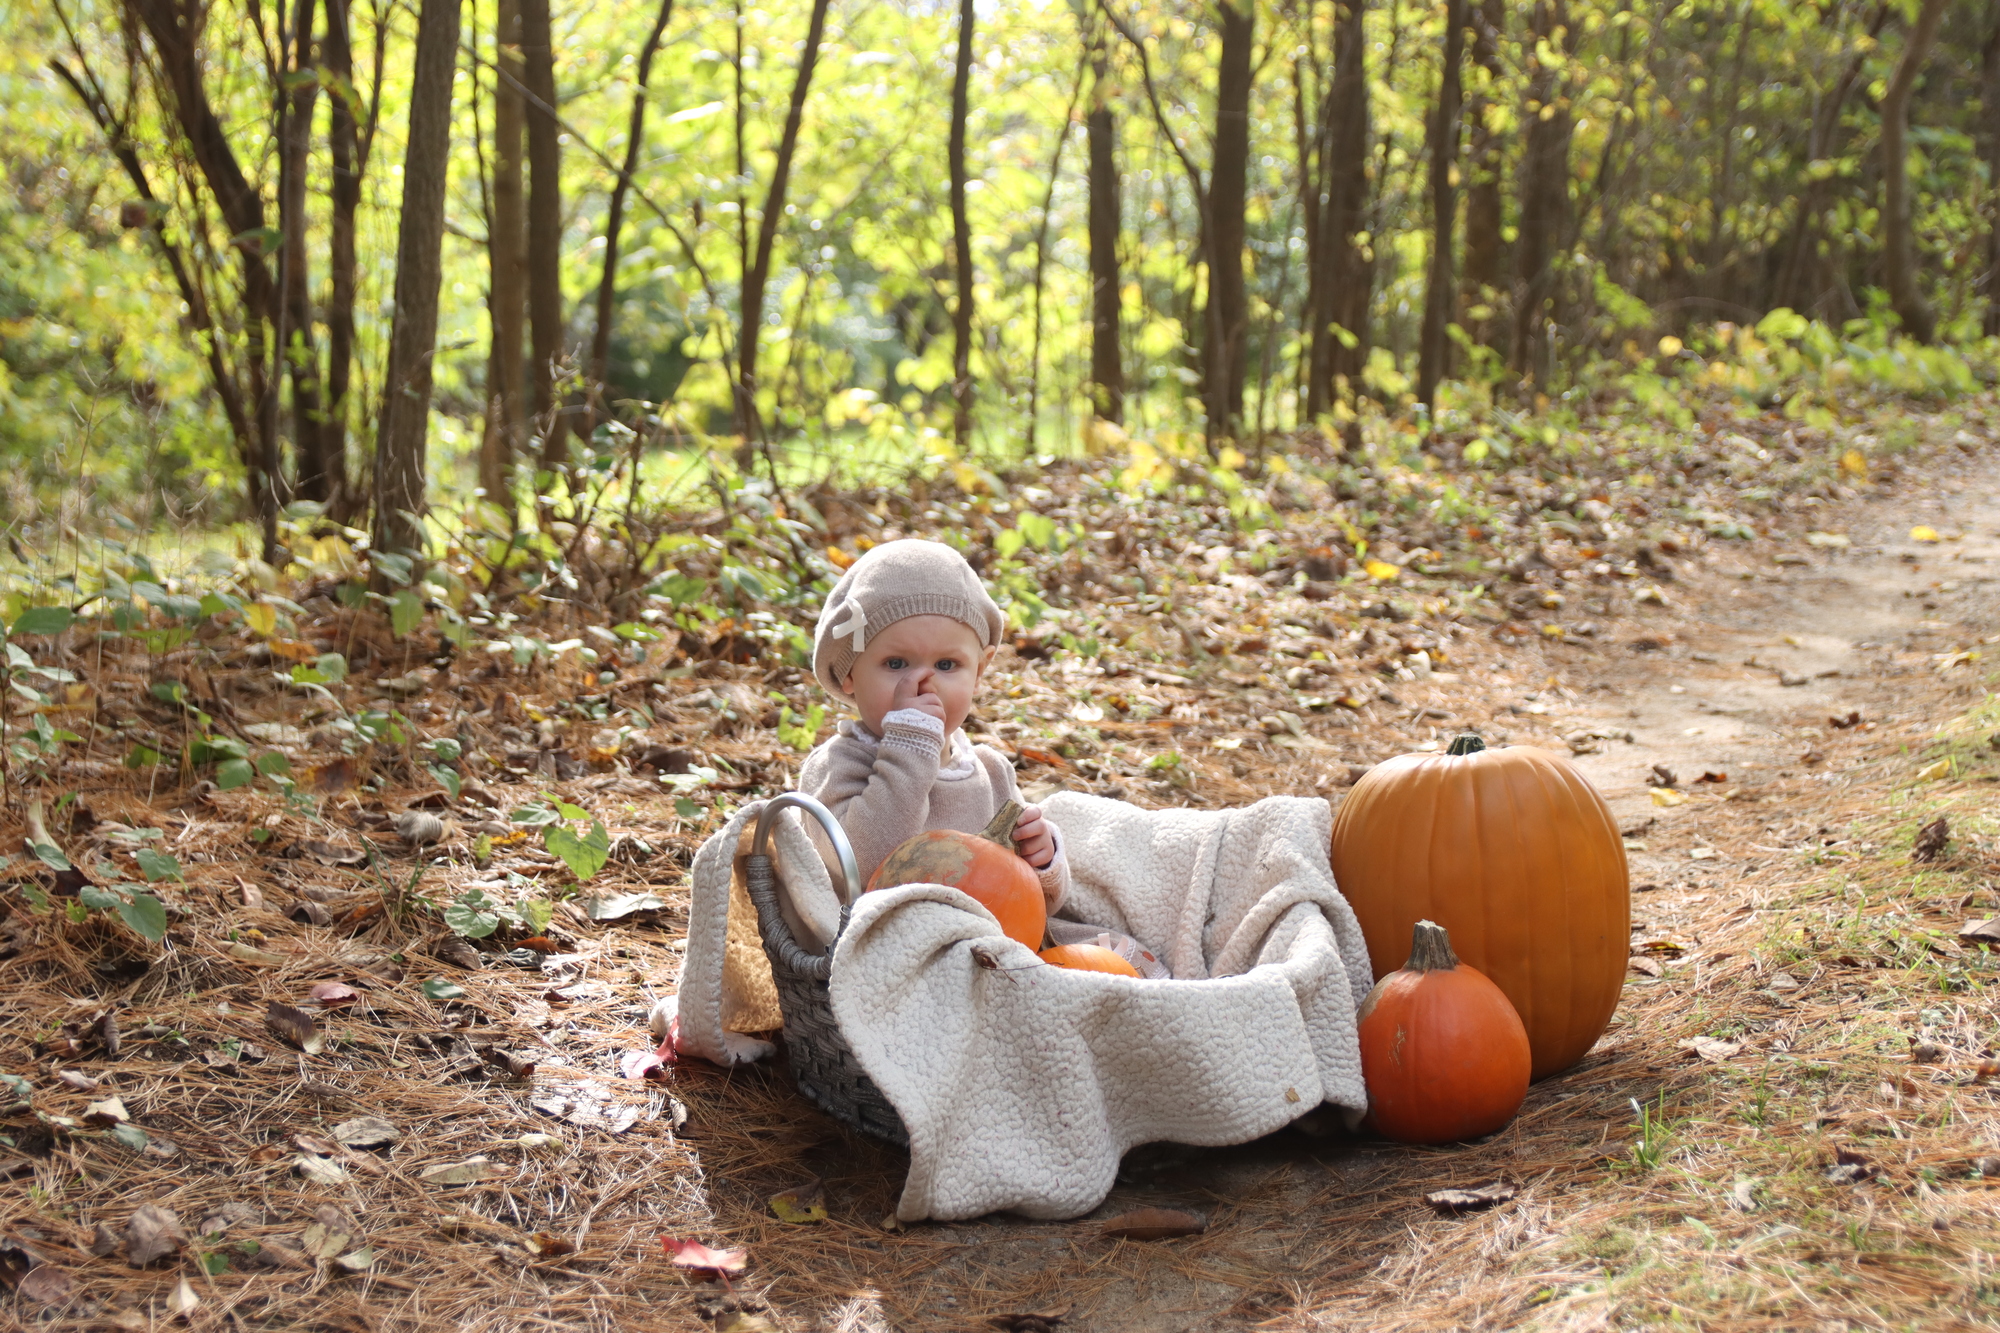 Baby girl wearing cream outfit and hat sits in a basket with a pumpkin and is sucking her thumb